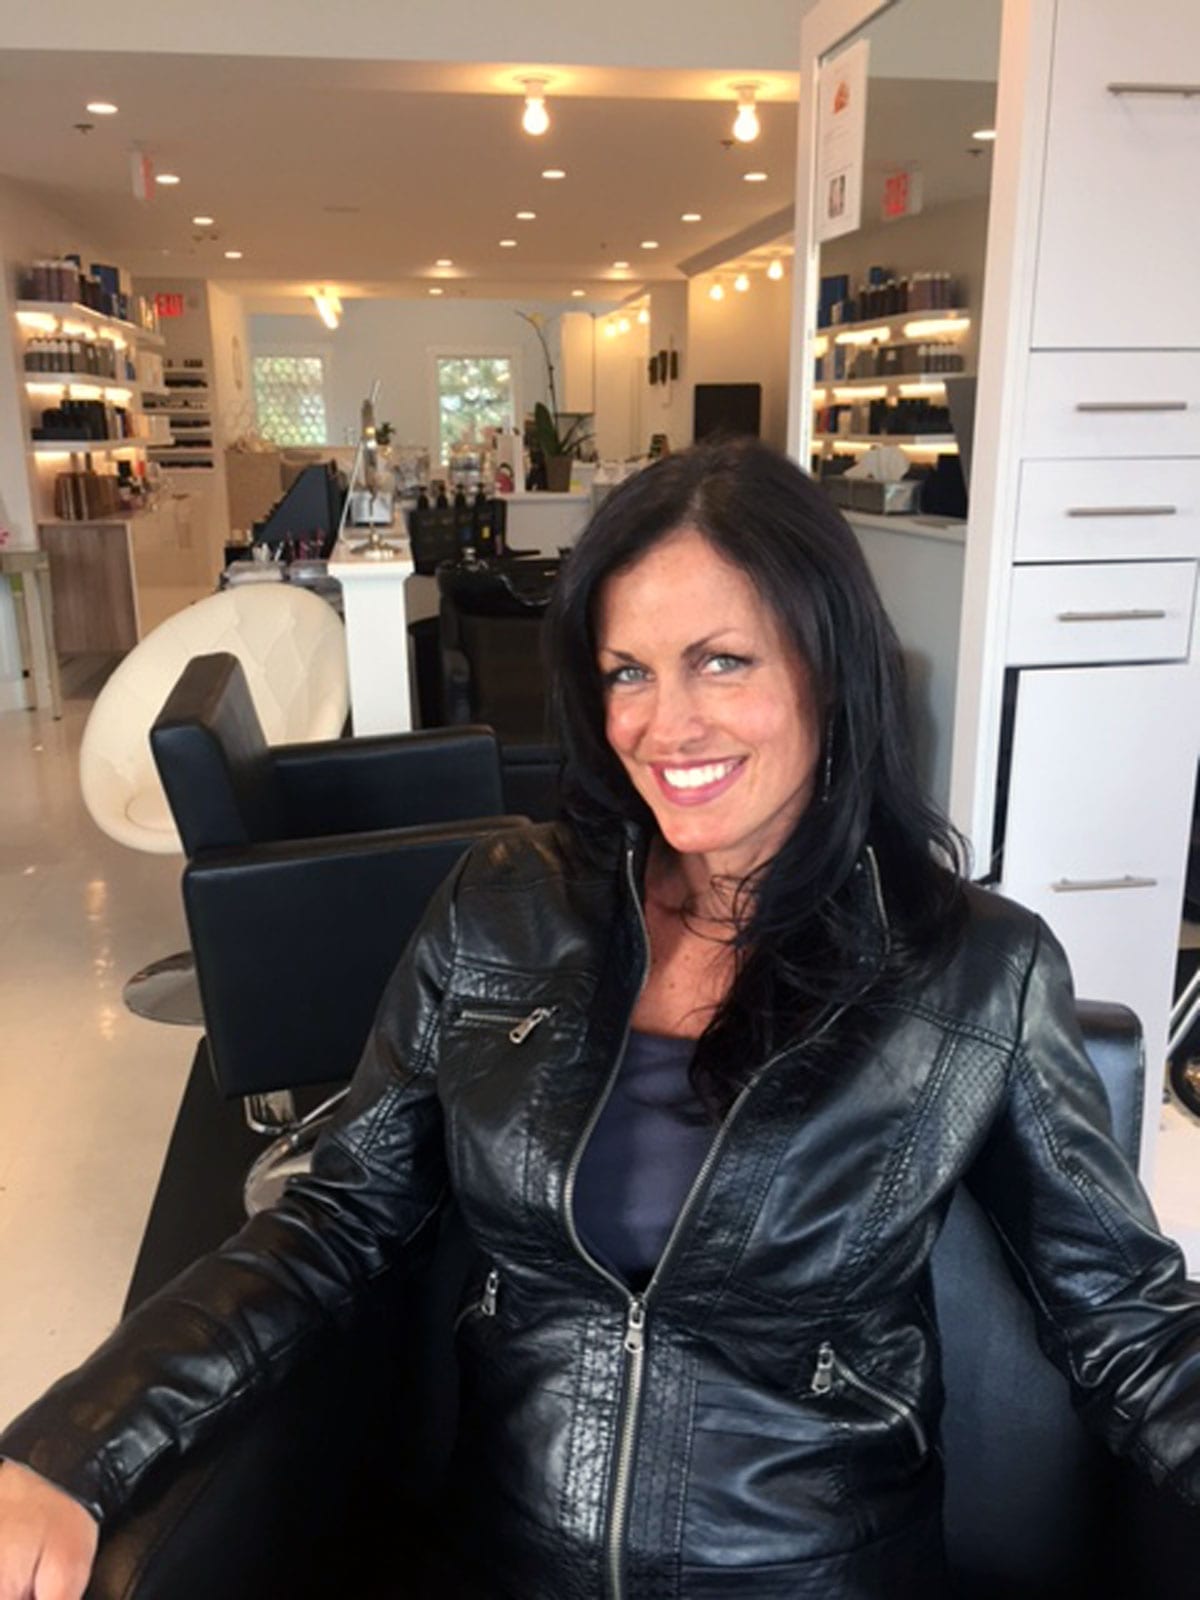 Pictured is hairstylist and color specialist Honey Jo Hersey.